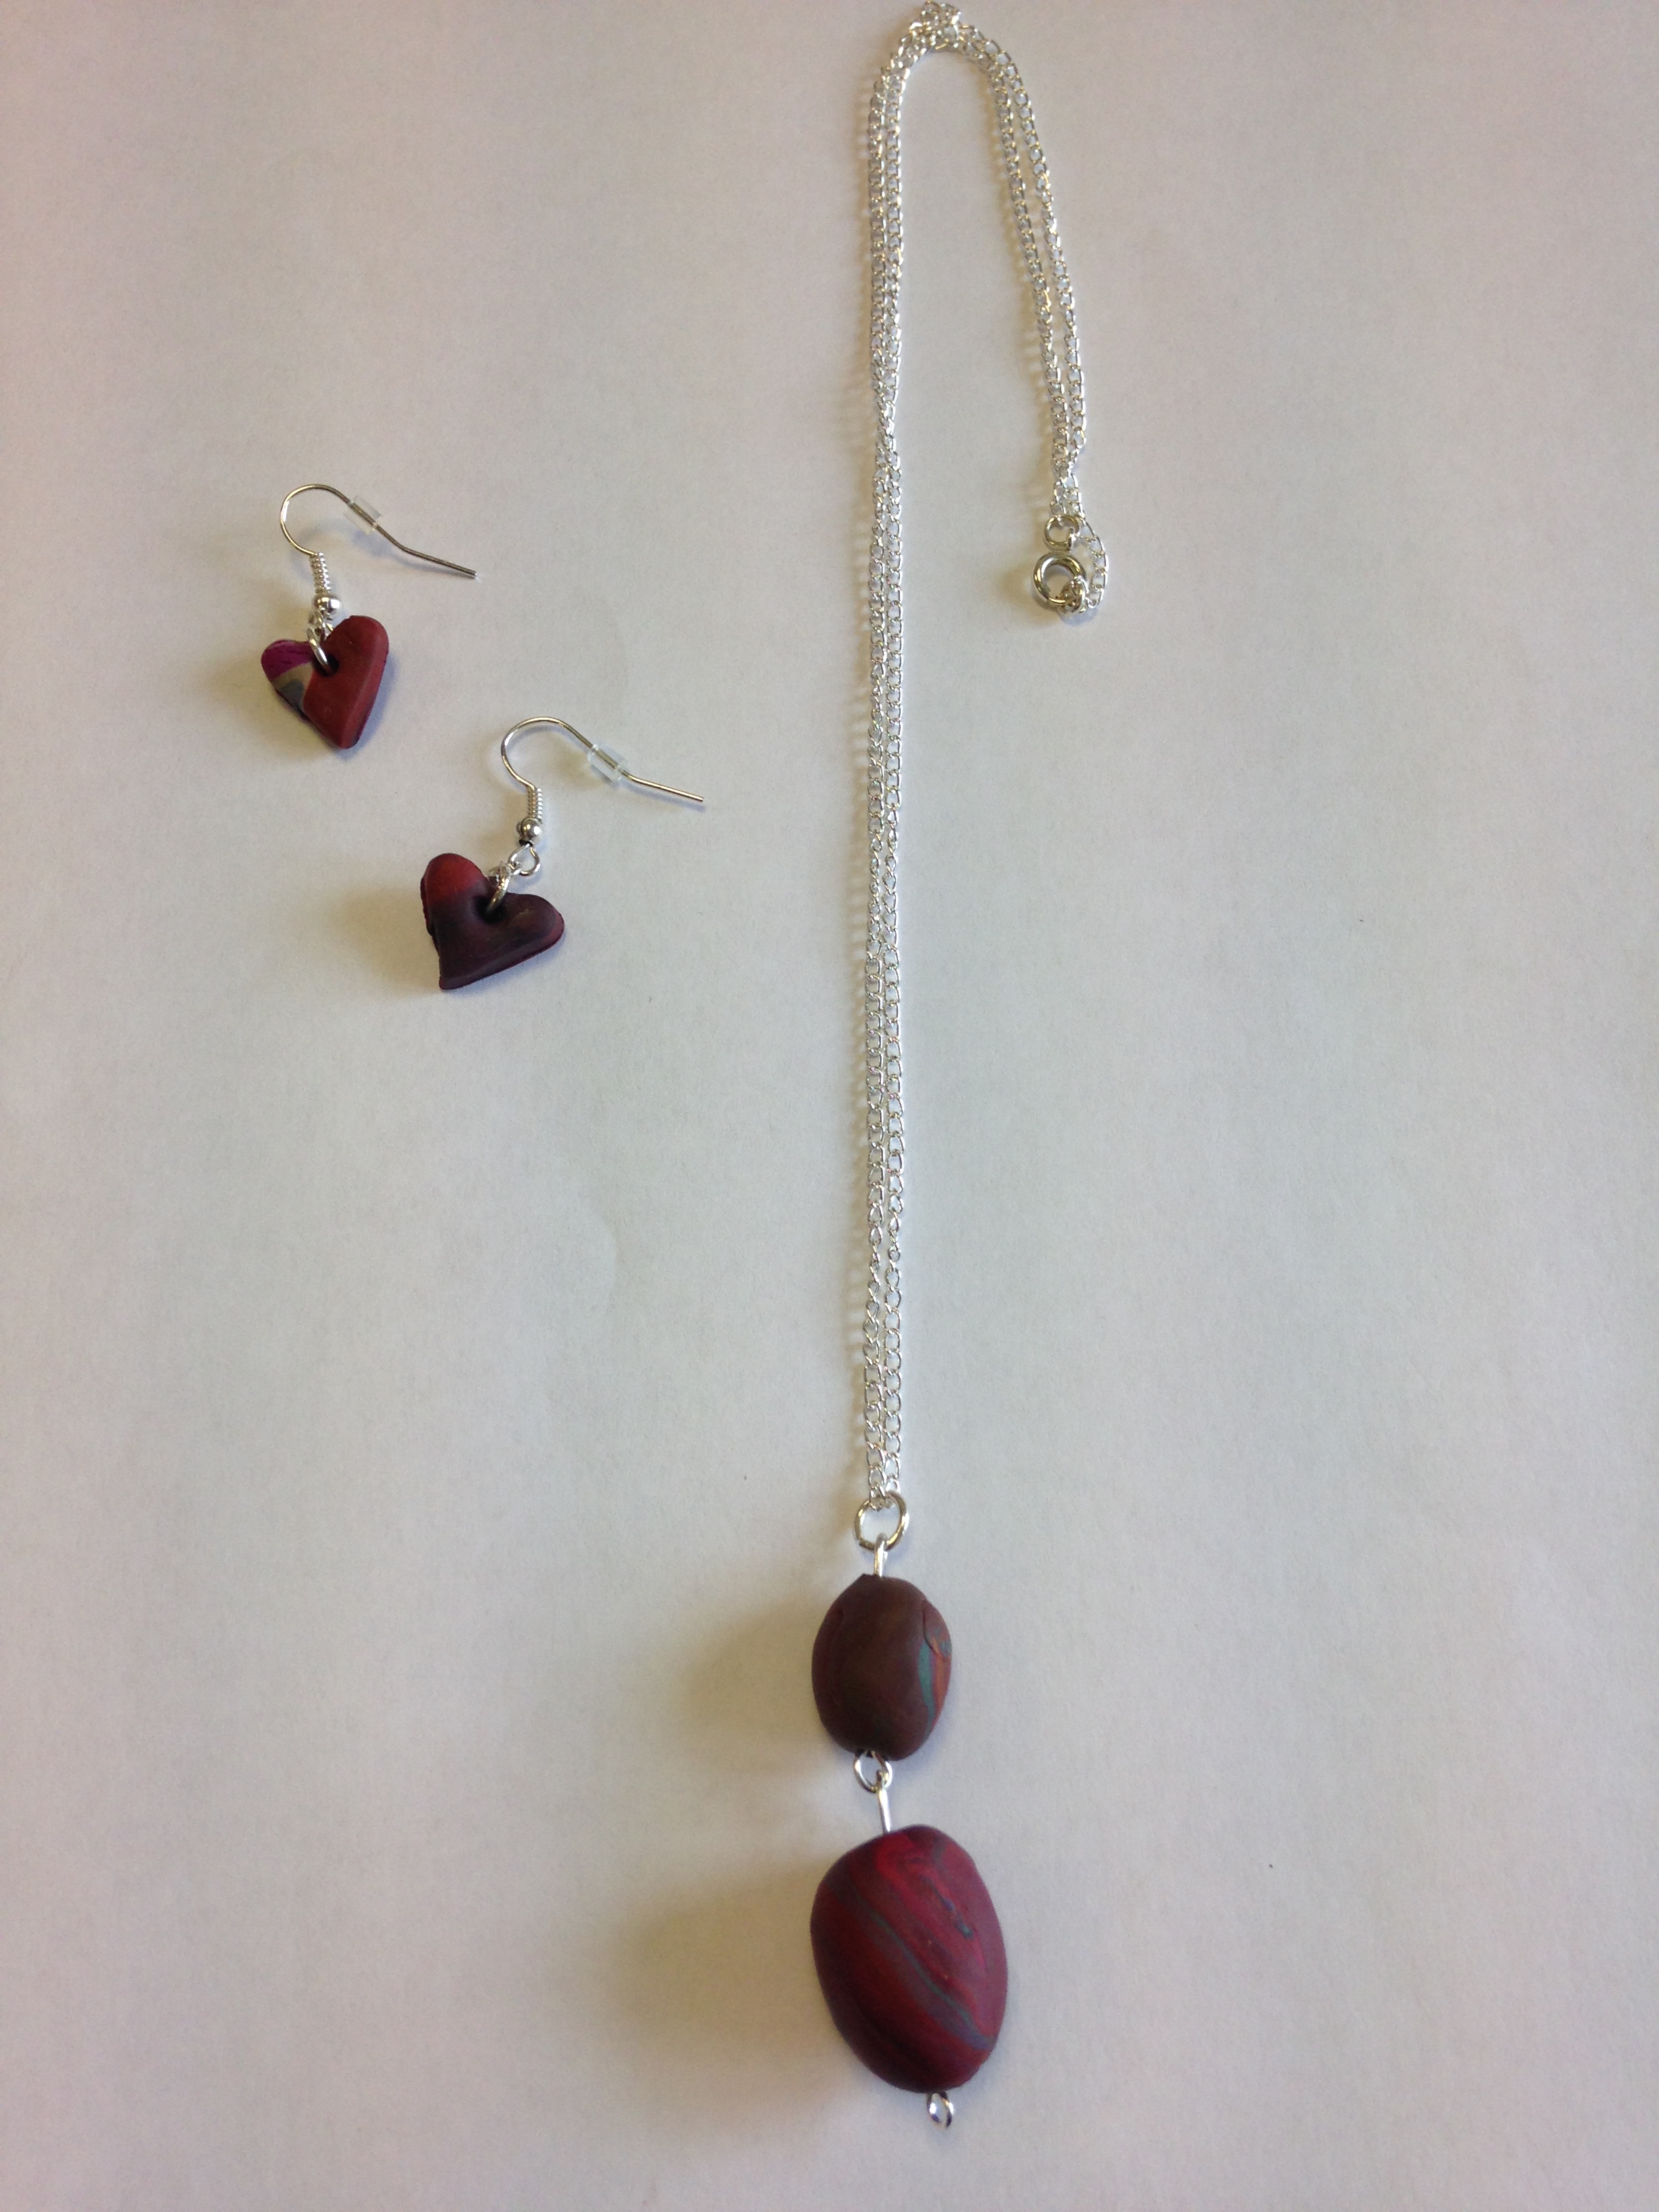 necklace with dark red polymer clay pieces and earrings as a shape of hearts